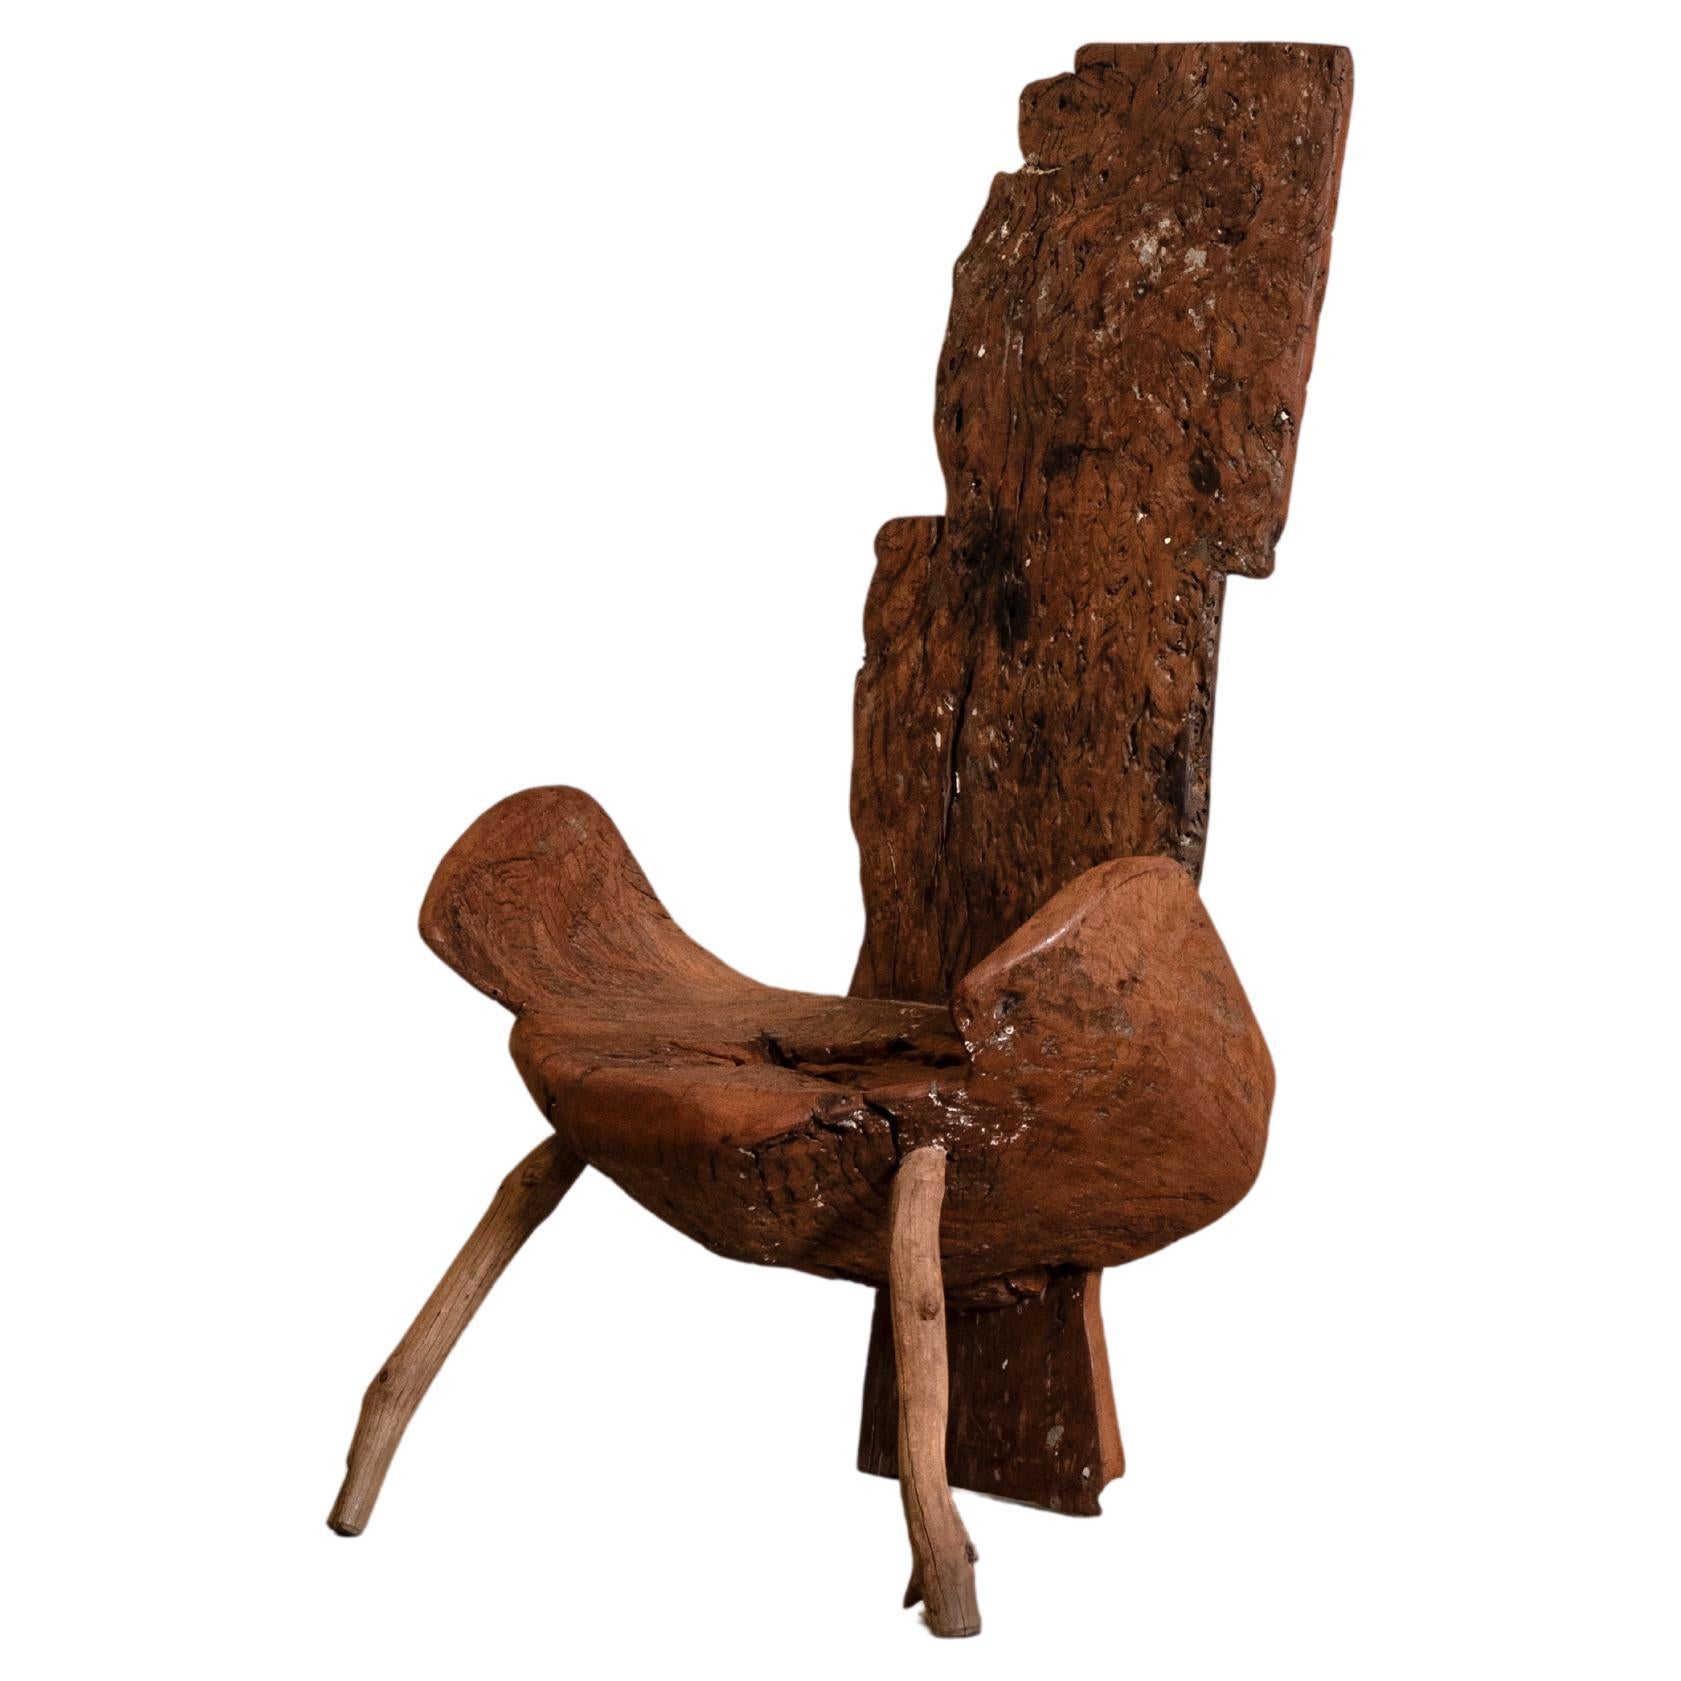 Lounge chair in reclaimed solid wood, contemporary Brazilian design